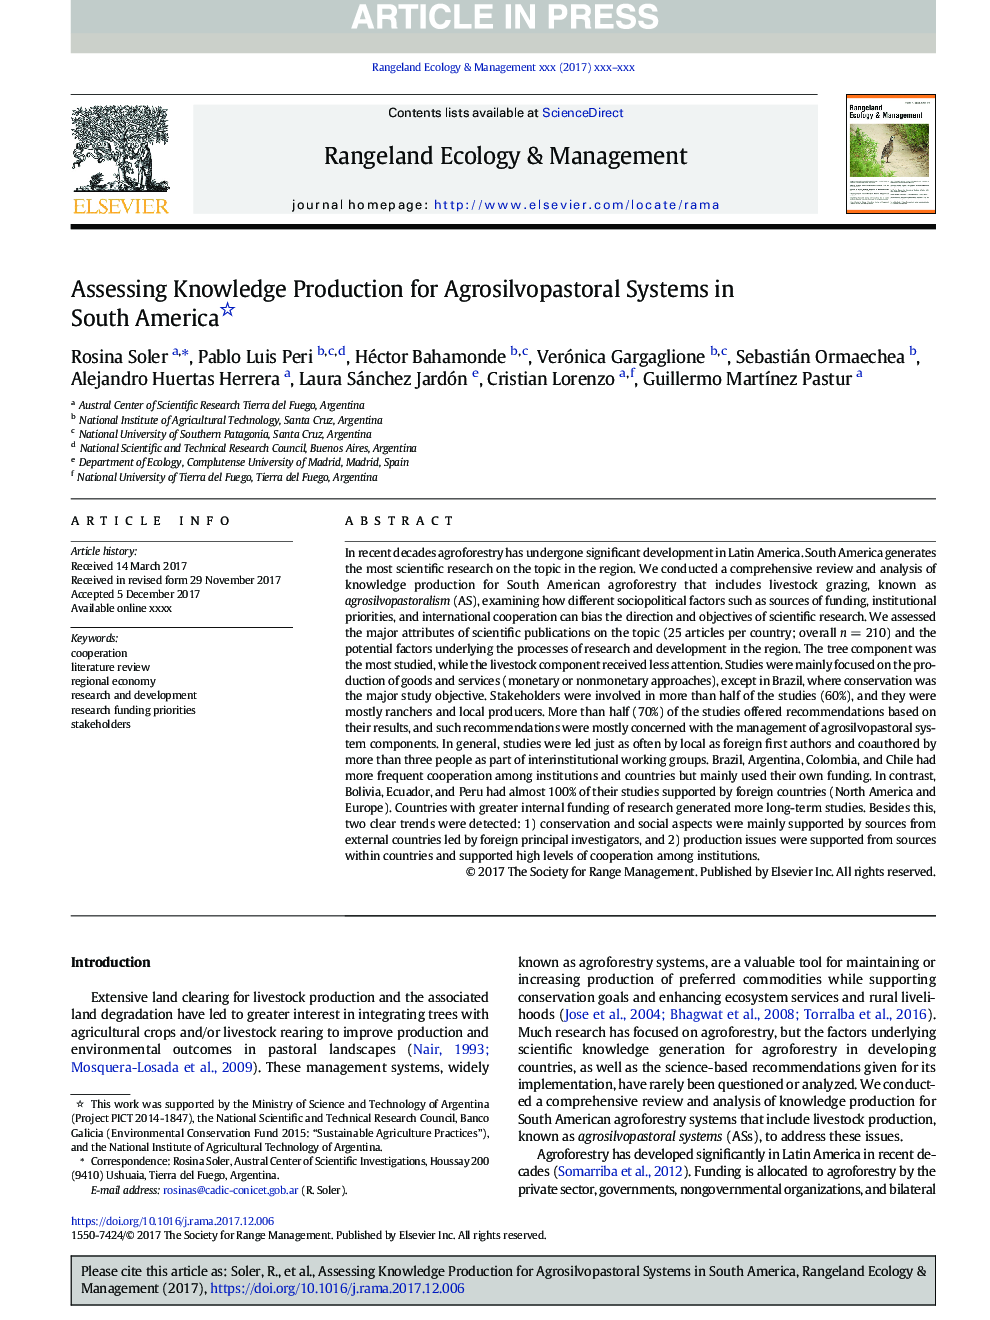 Assessing Knowledge Production for Agrosilvopastoral Systems in South America